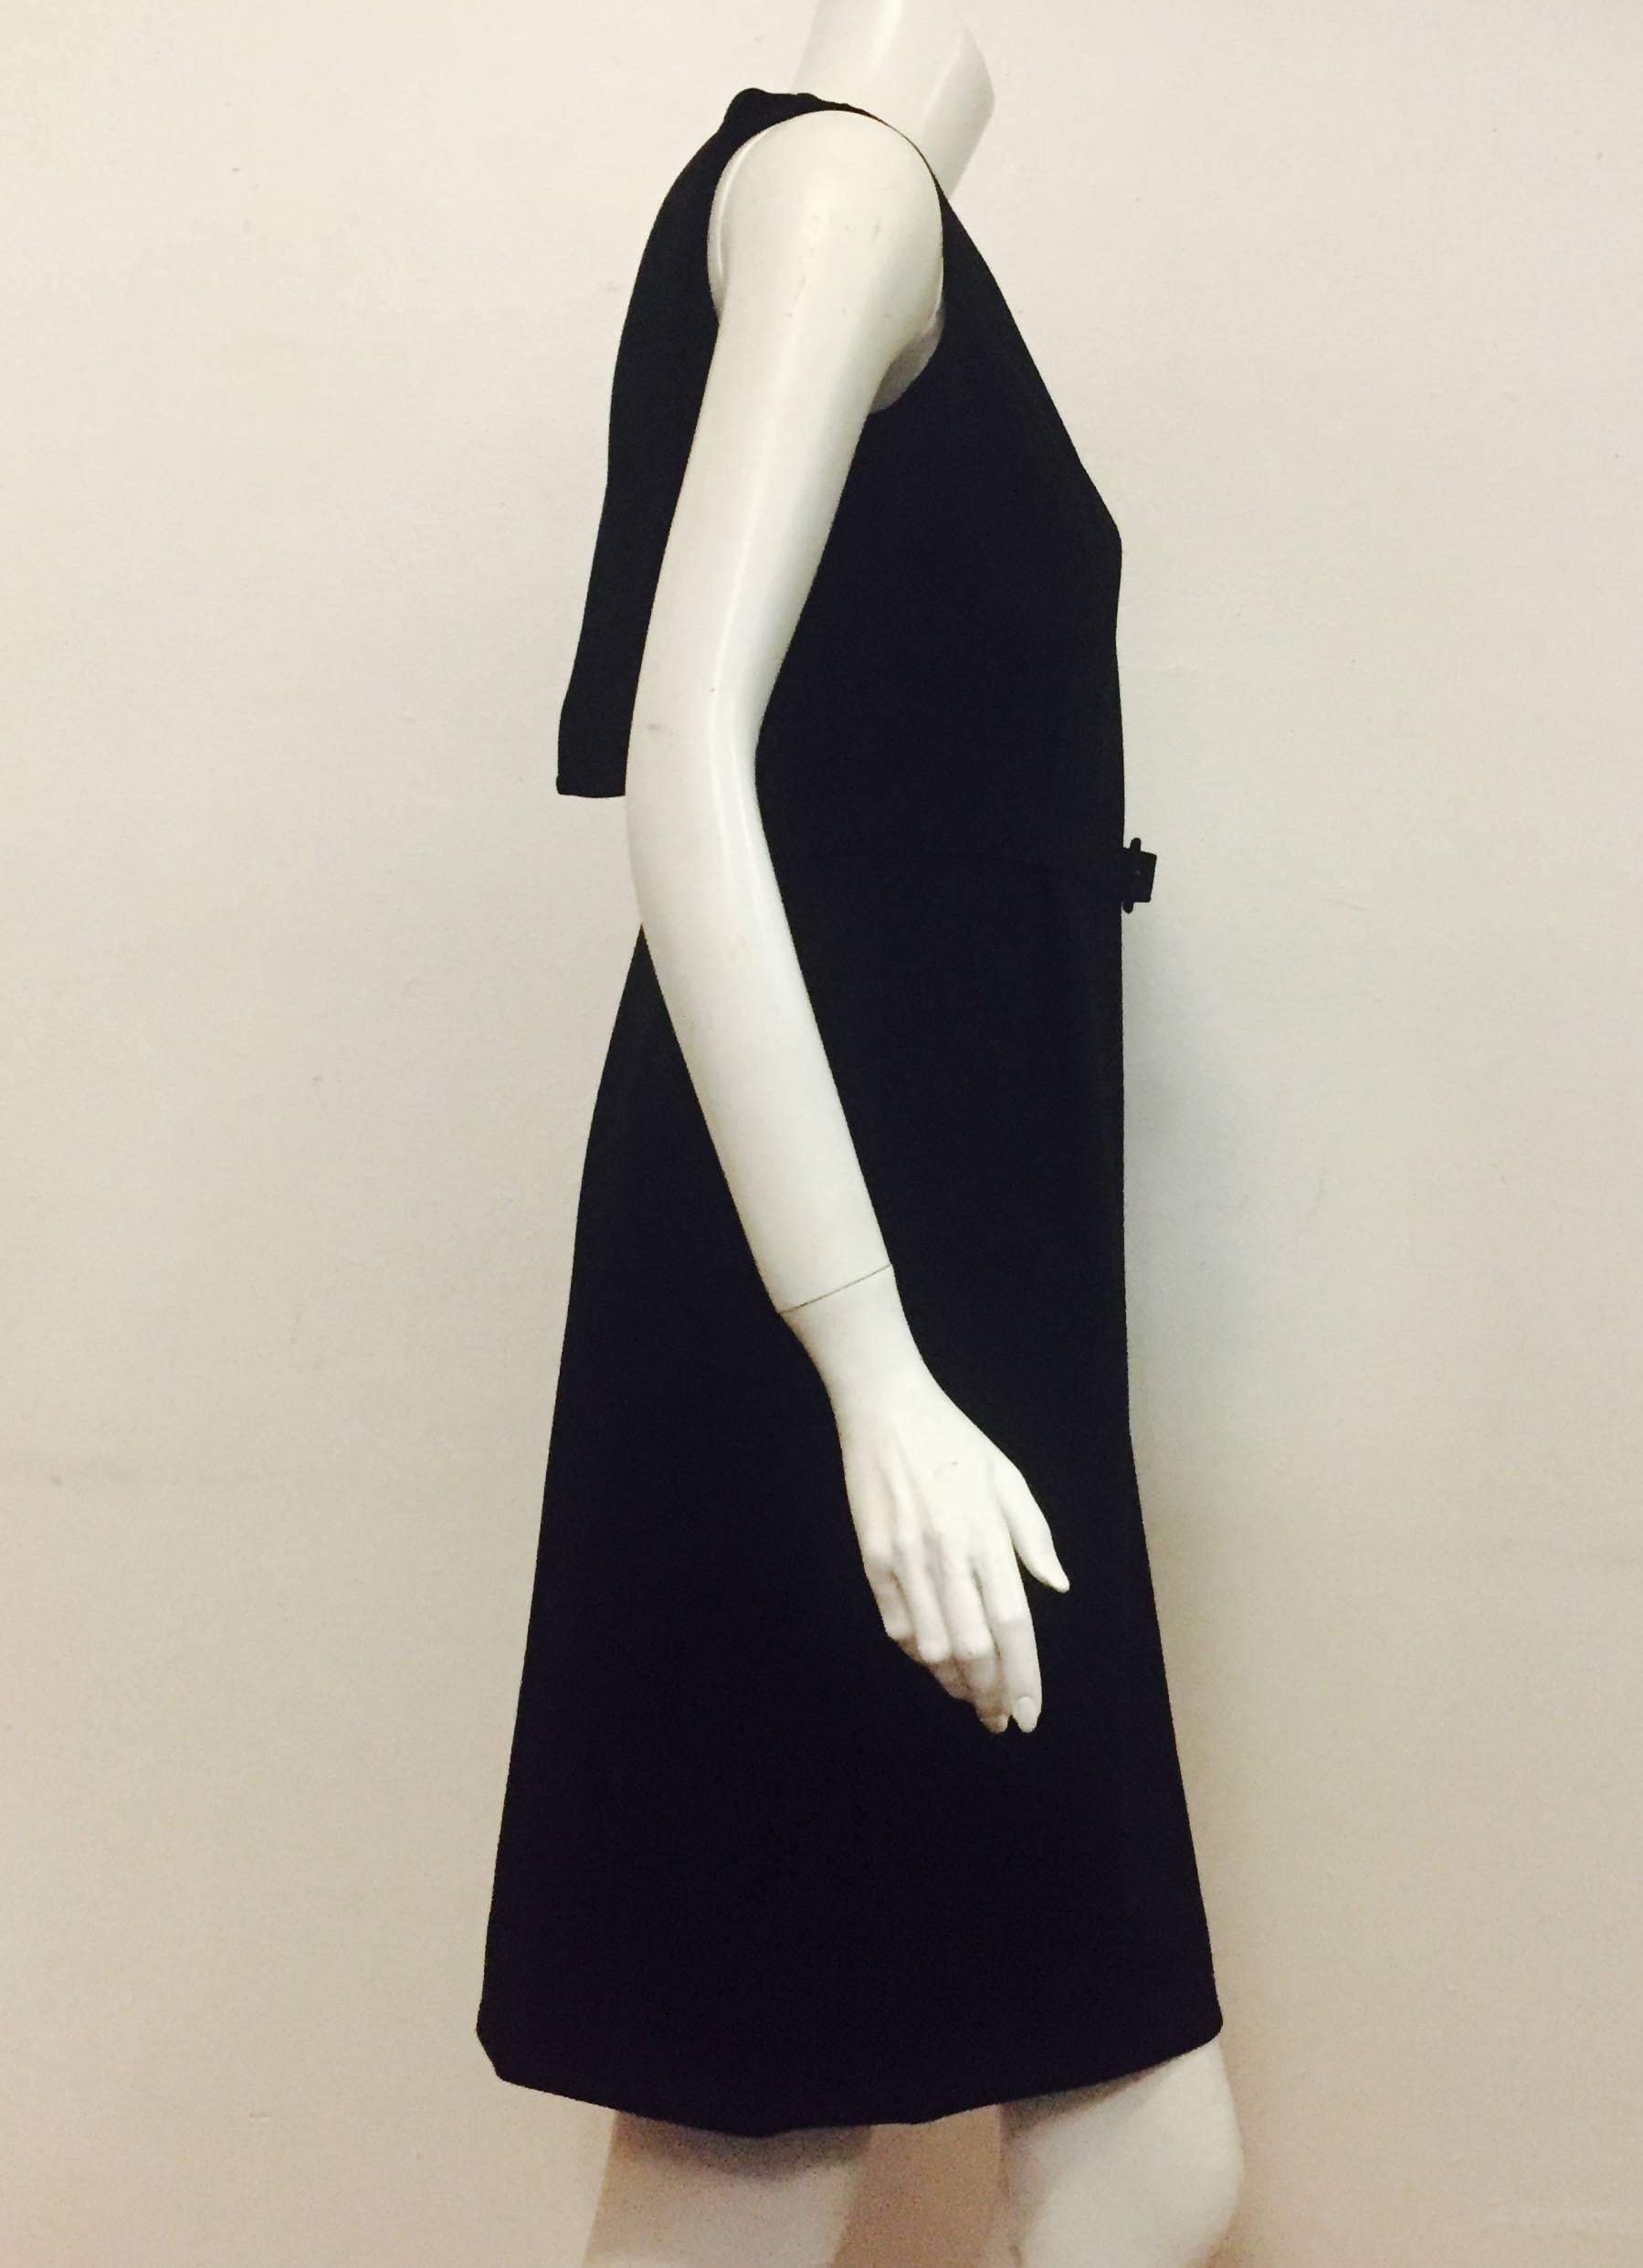 Oscar de la Renta designed for all women, from movie stars to top executives, to socialites.  This Oscar de la Renta sleeveless black wool dress with tonal stitching that accentuates the bust line and the waist is classic and timeless.  Personalize